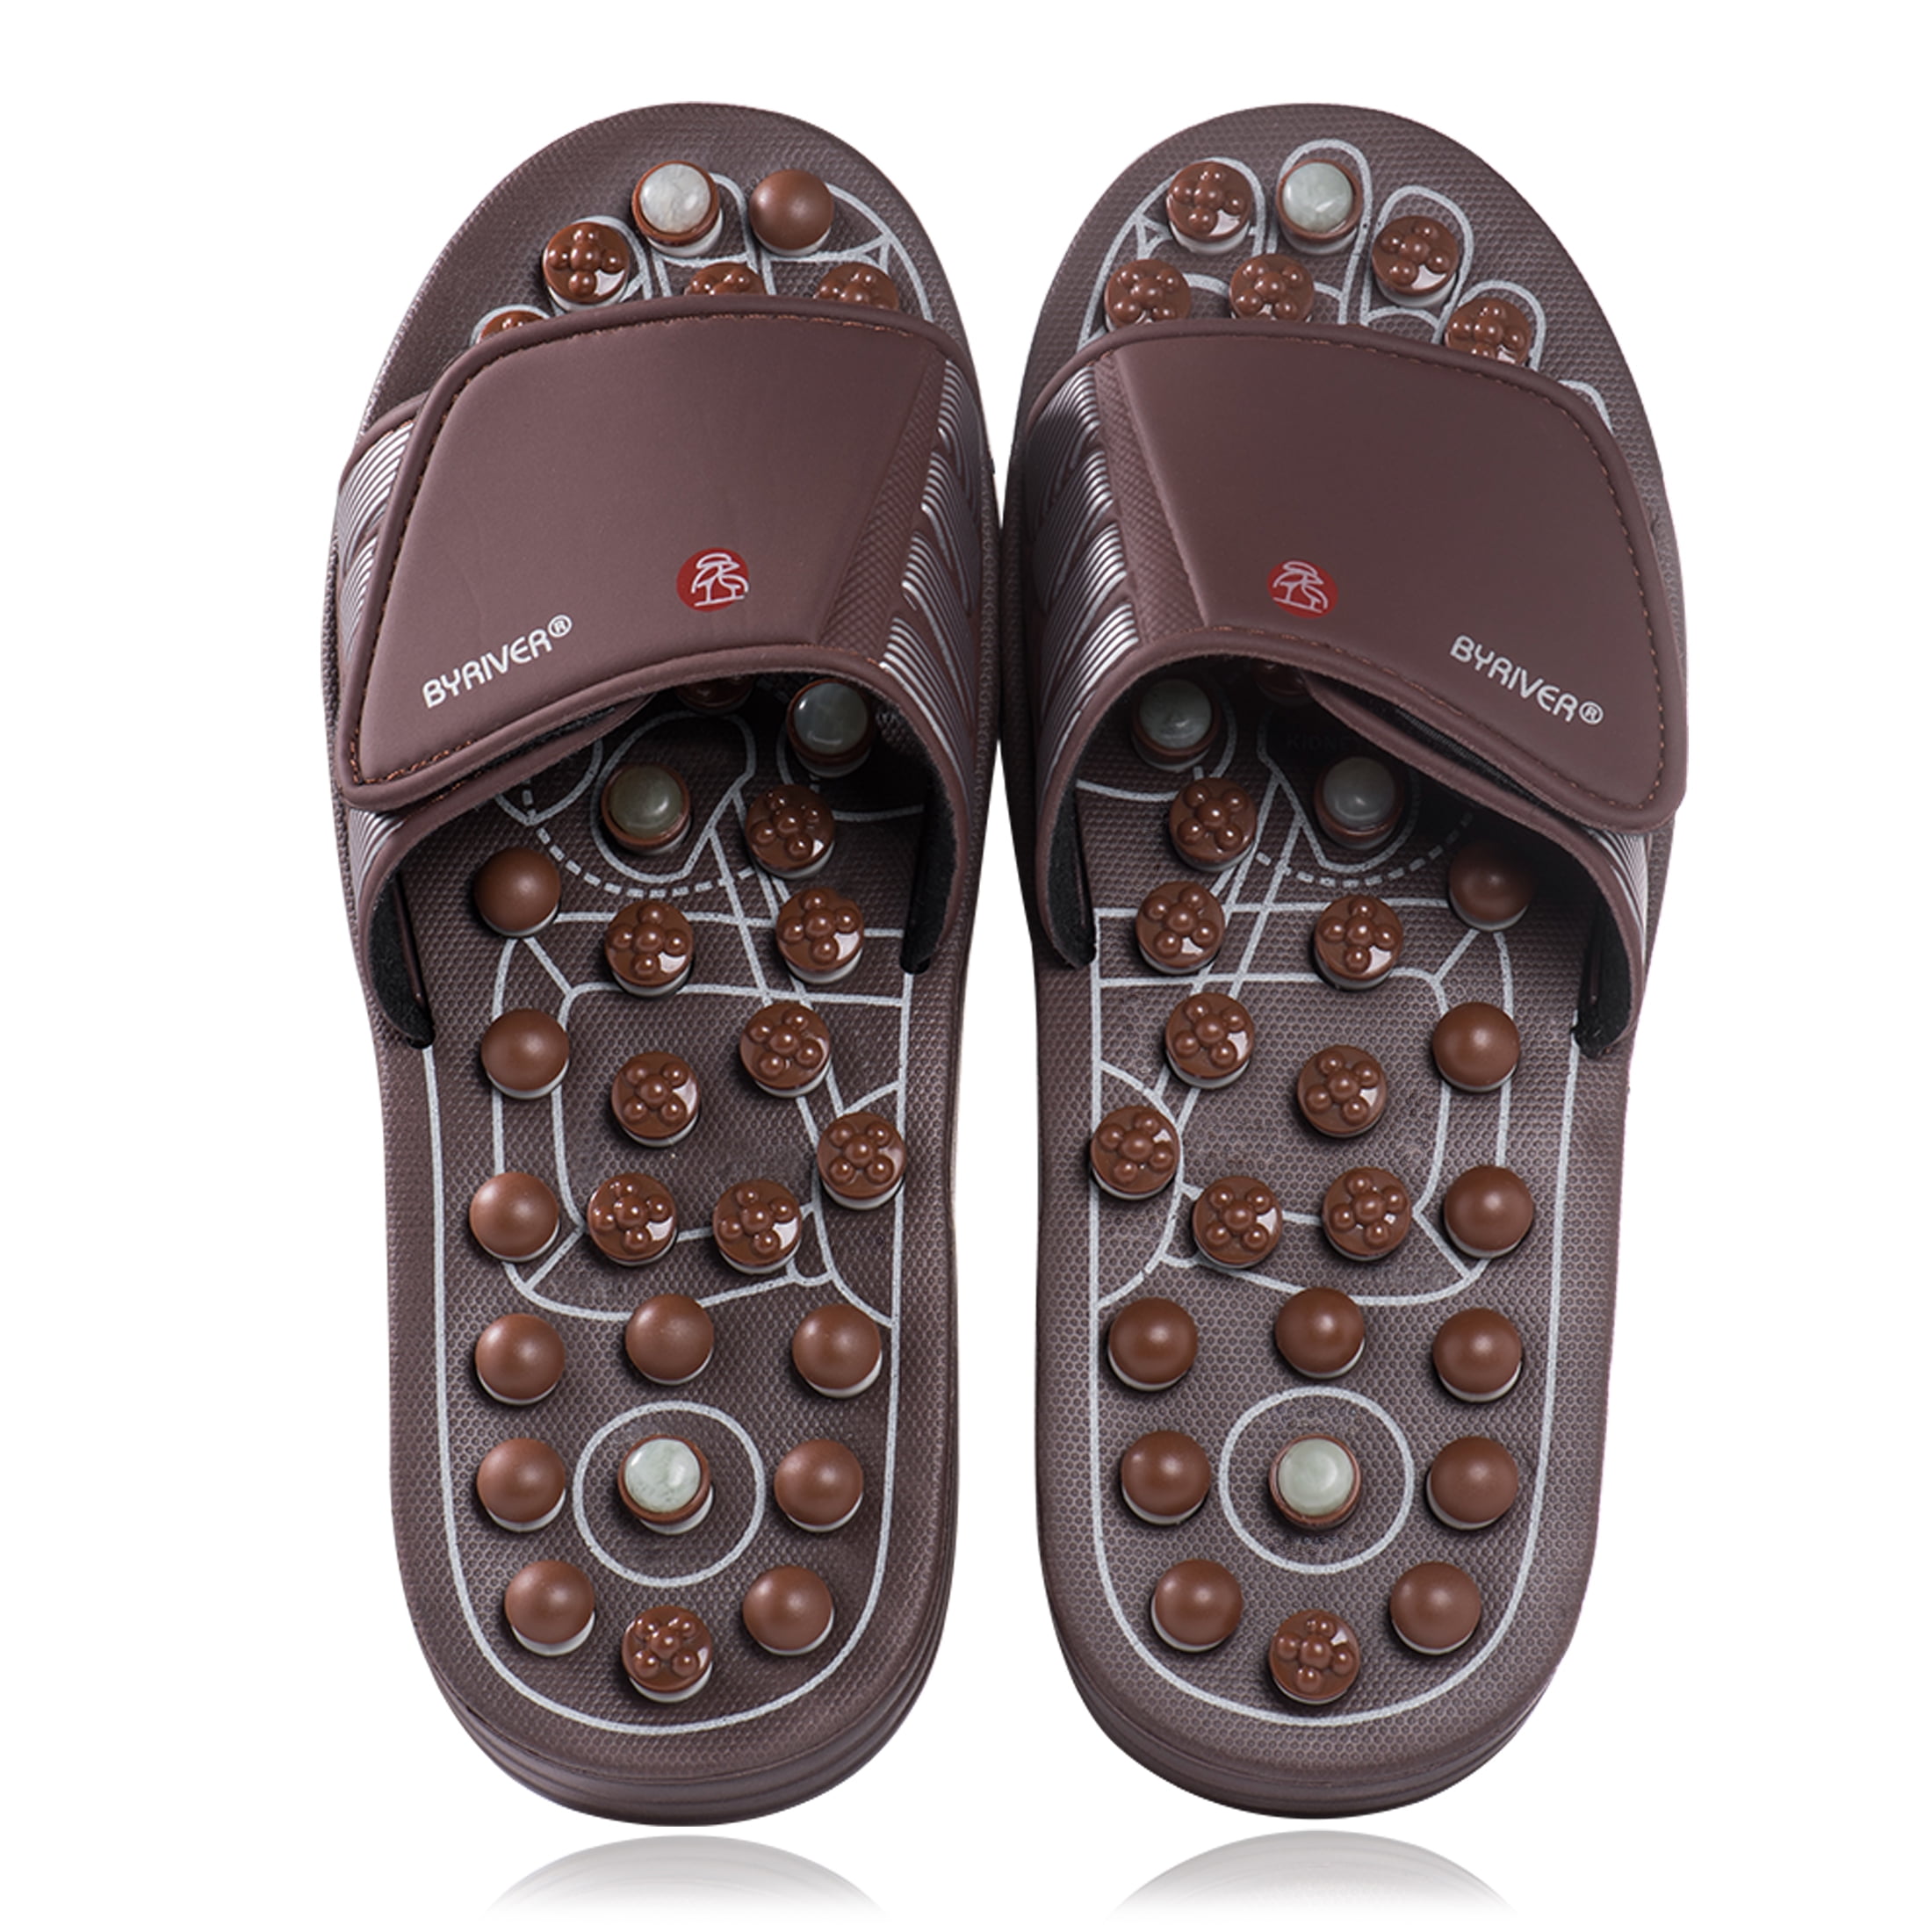 BYRIVER Acupuncture Foot Massager for circulation, Slippers Shoes for Women (03M) - Walmart.com